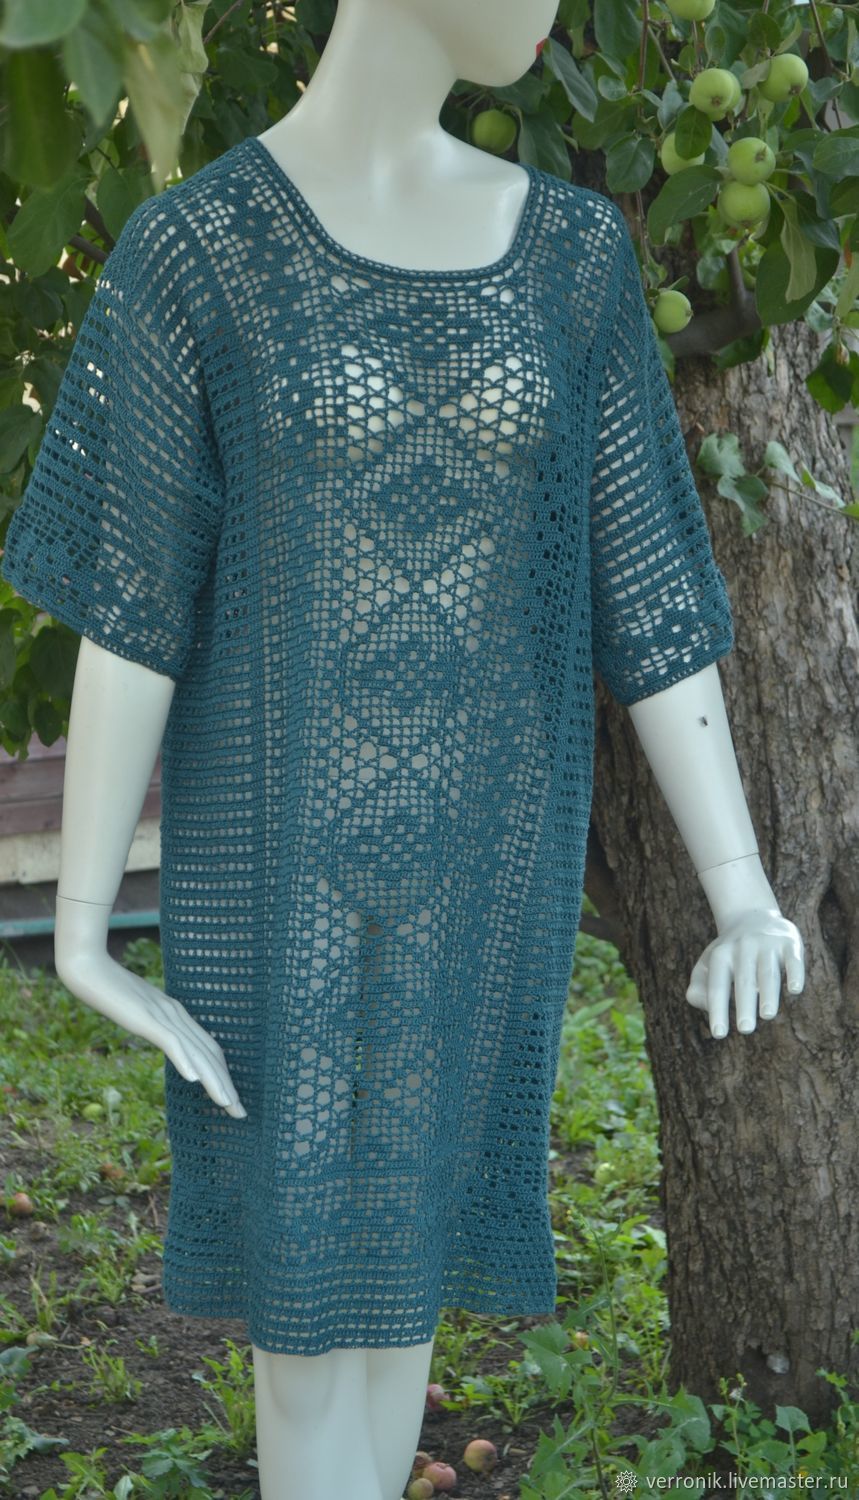 Clothing. Dresses.Dress knitted. Fair masters - handmade. Handmade dress. Dress casual. Clothing. Dress knit `Needles`. Dark green. Handmade.  Shop masters of Dominica.
